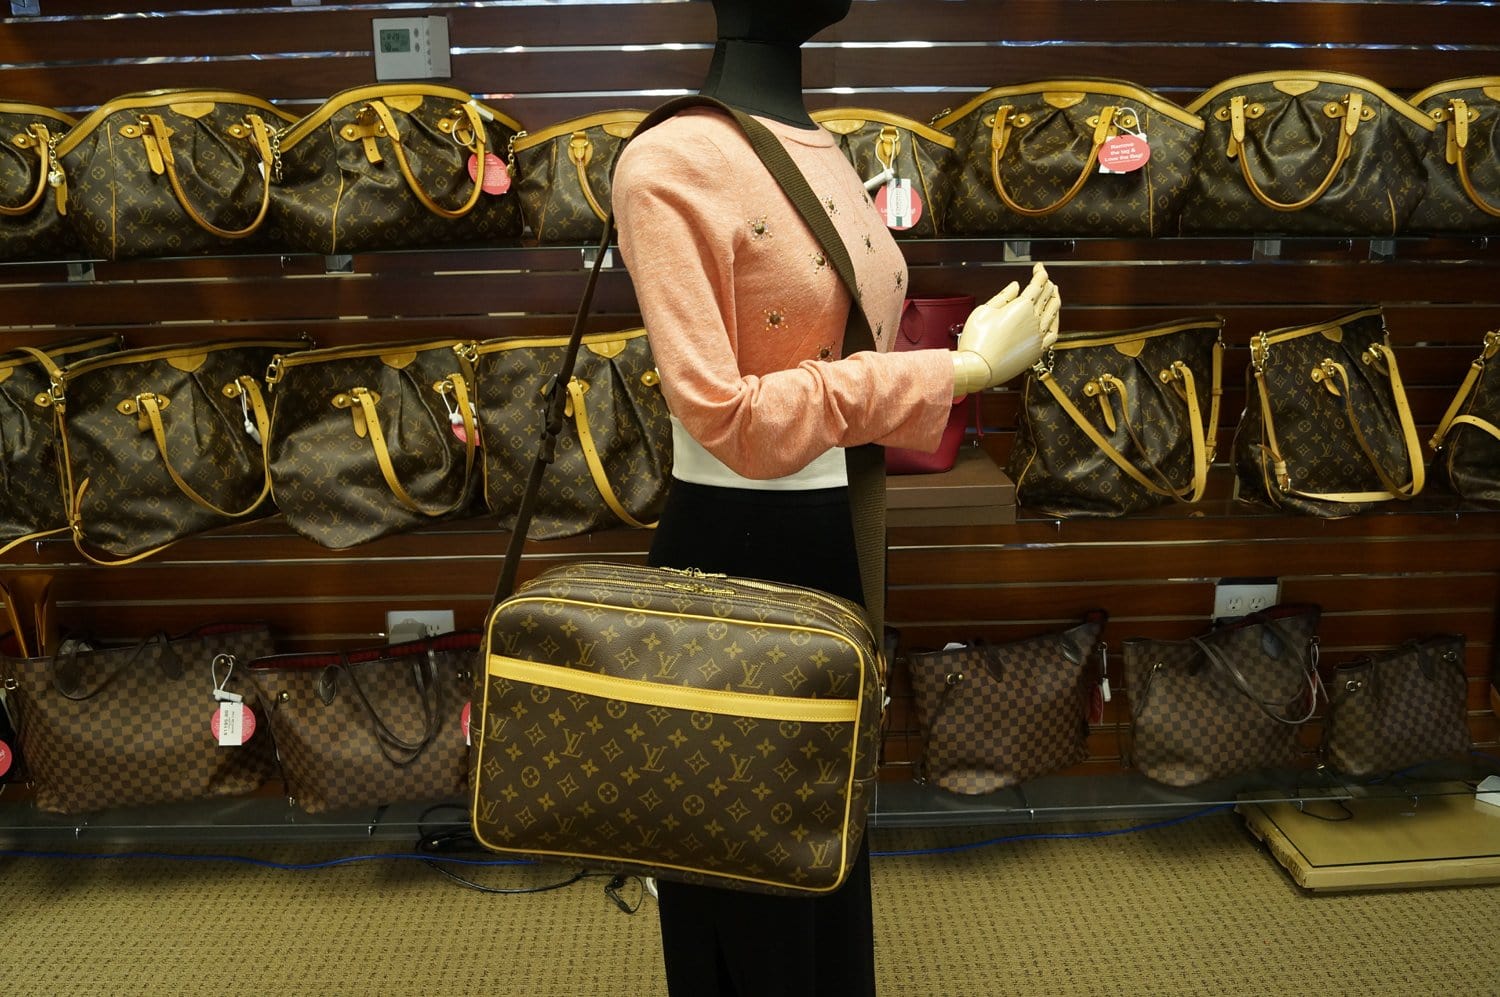 Shop for Louis Vuitton Monogram Canvas Leather Reporter GM Bag - Shipped  from USA